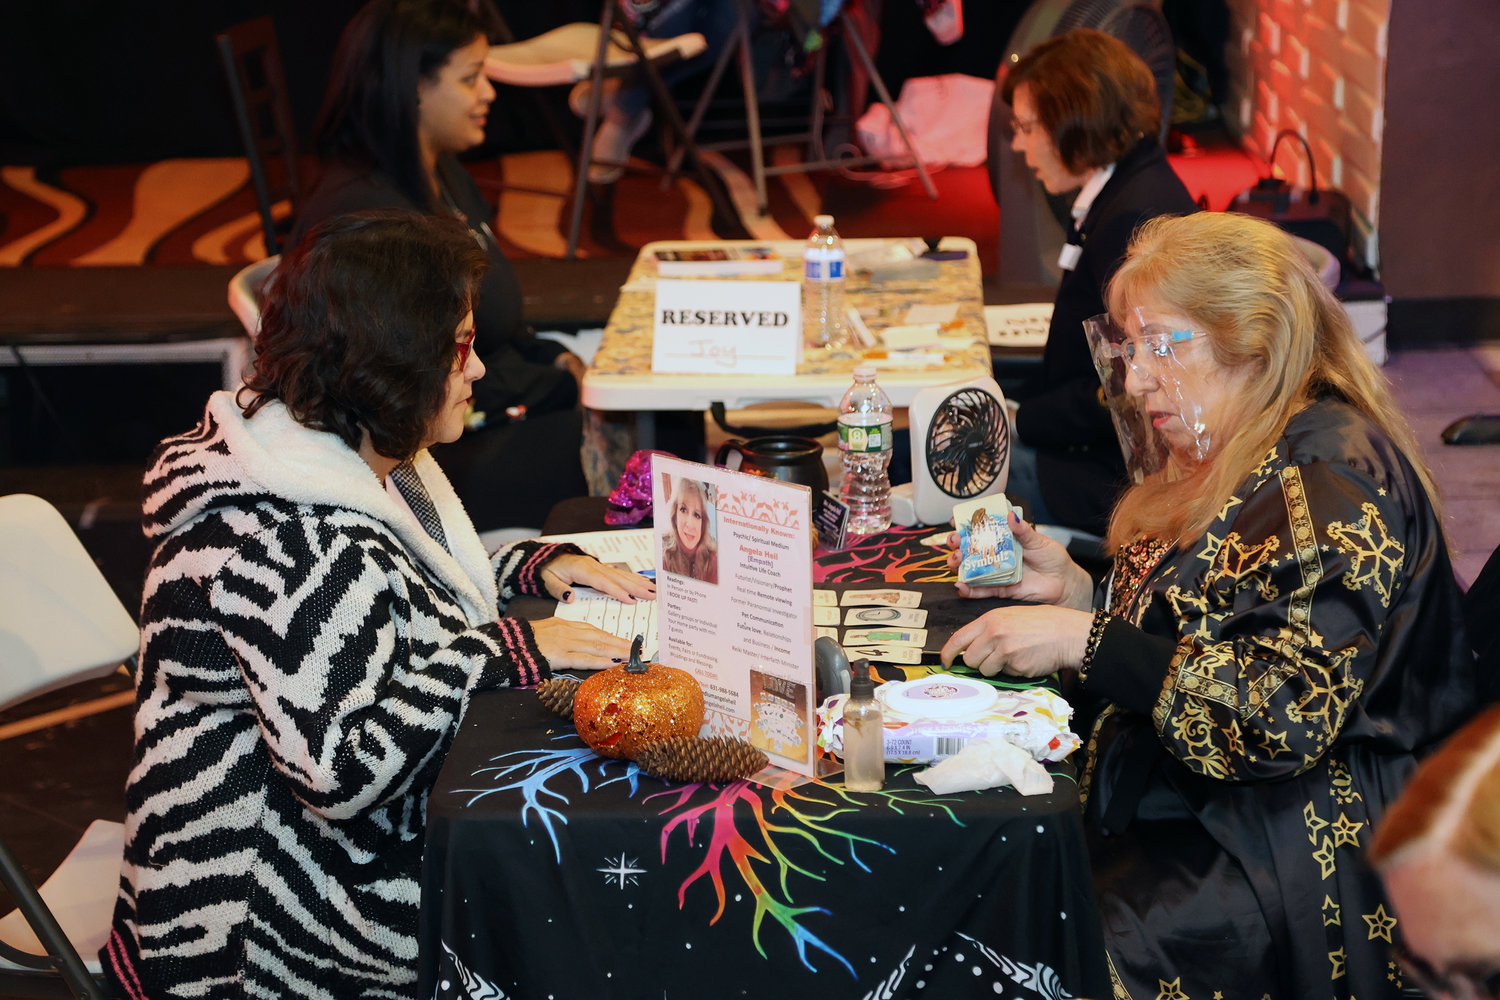 Psychics, mediums and more gather at West Hempstead fair Herald